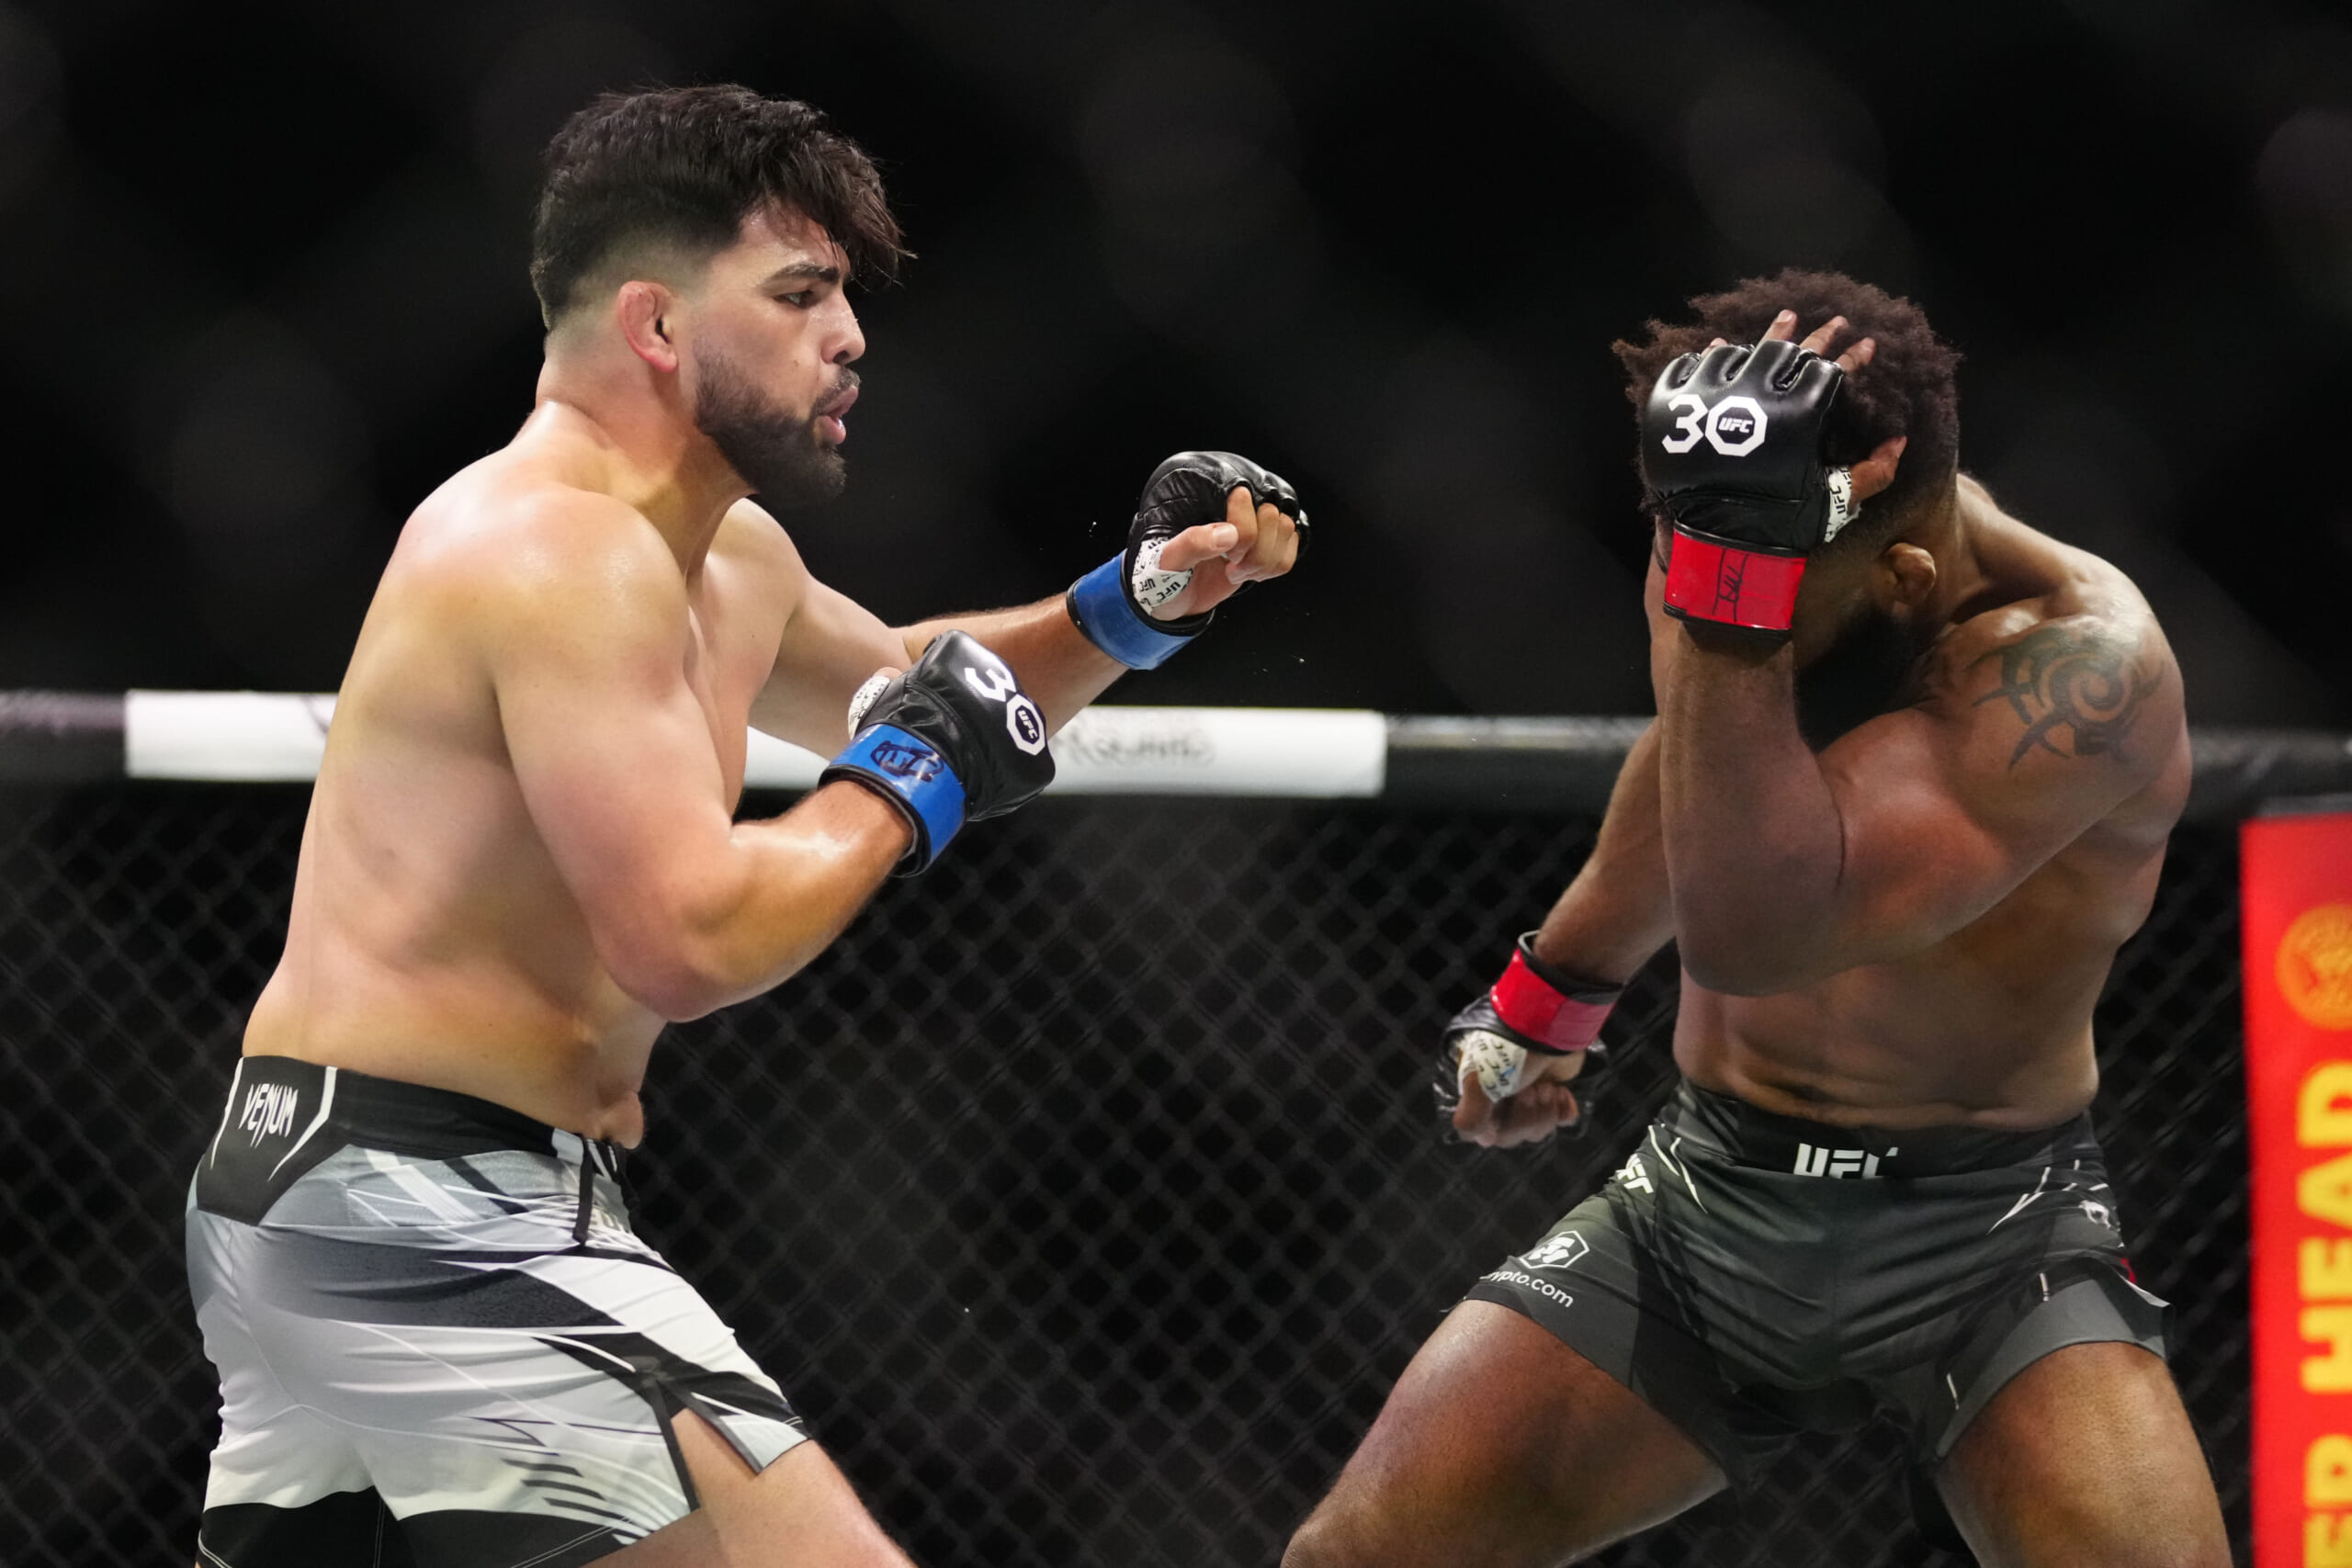 Who should the UFC have Kelvin Gastelum face at welterweight?